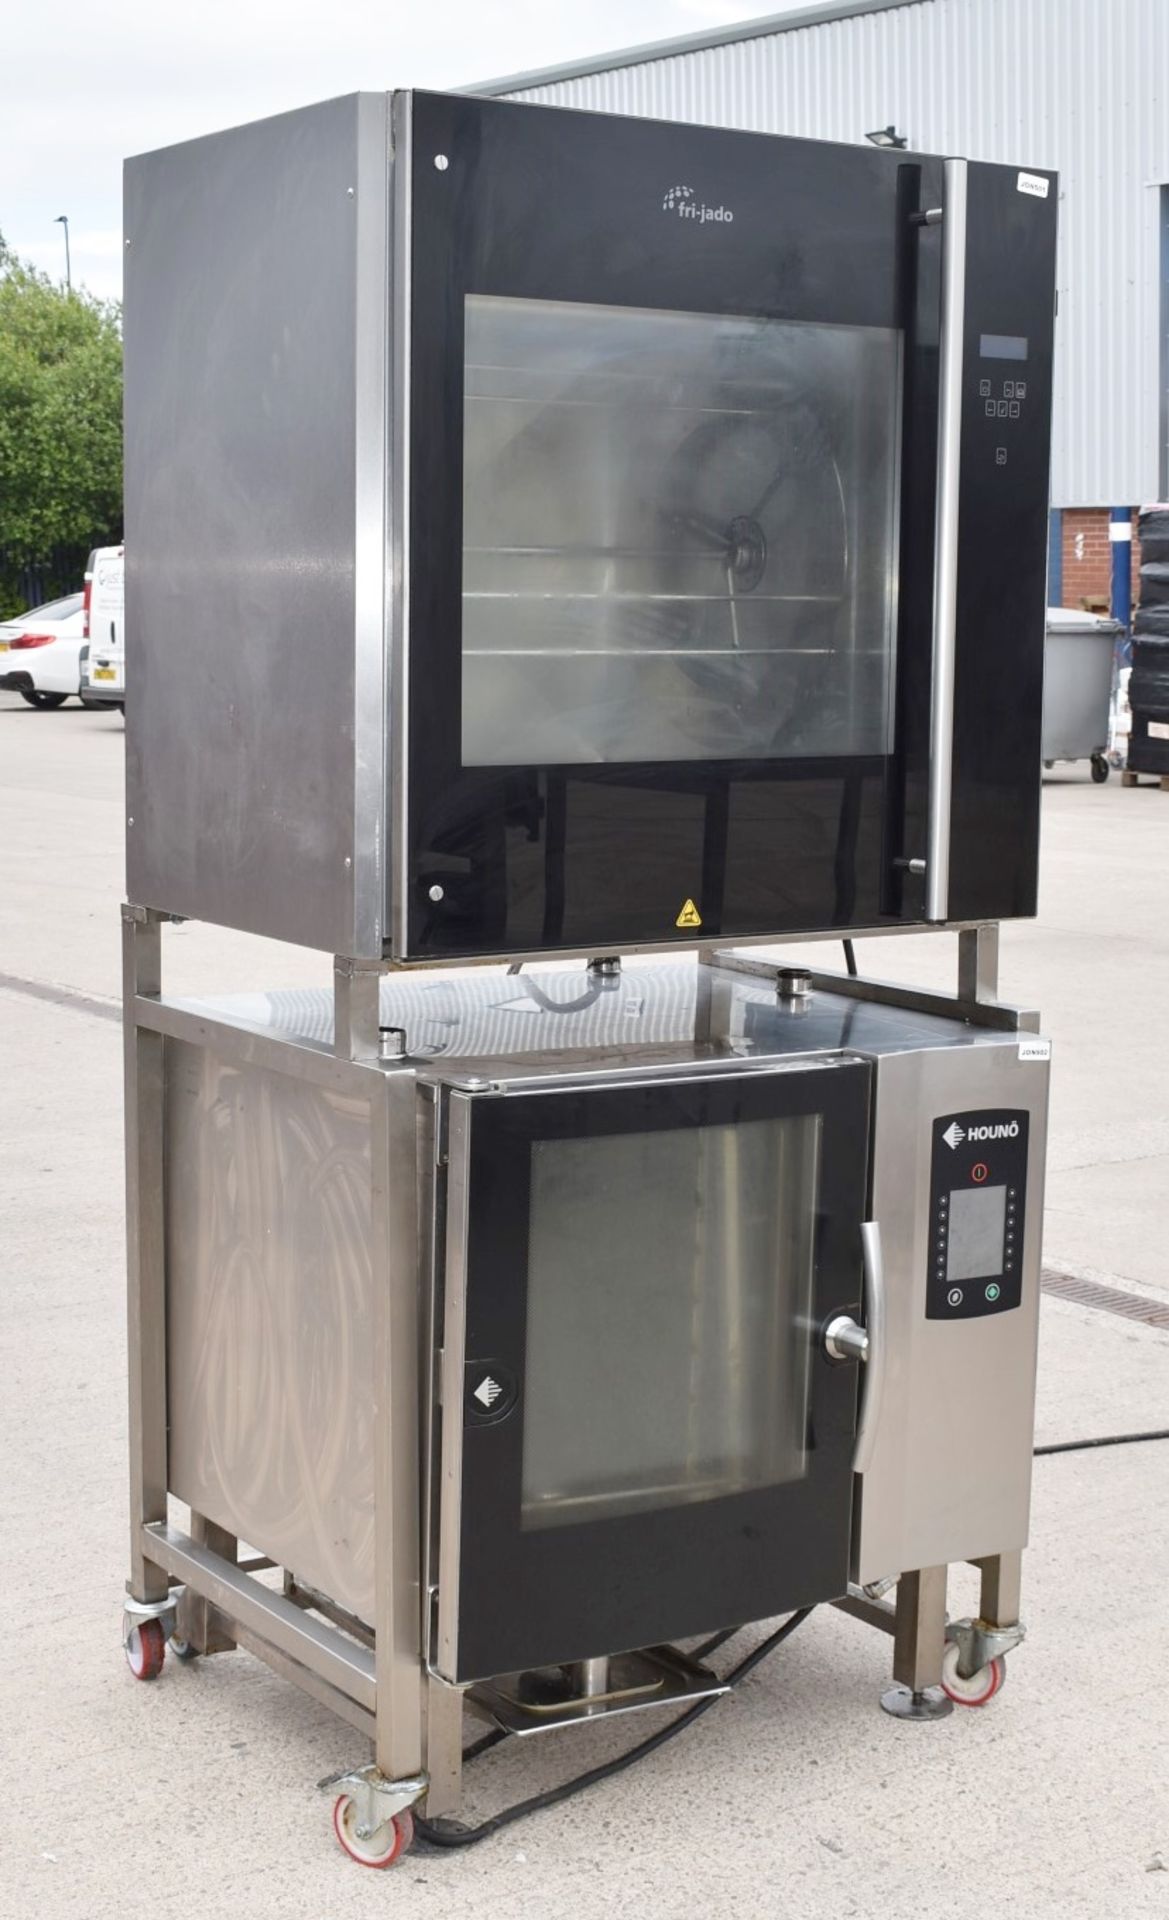 1 x Houno Electric Combi Oven and Fri-jado Rotisserie Oven Combo With Stand - 3 Phase - Image 21 of 22